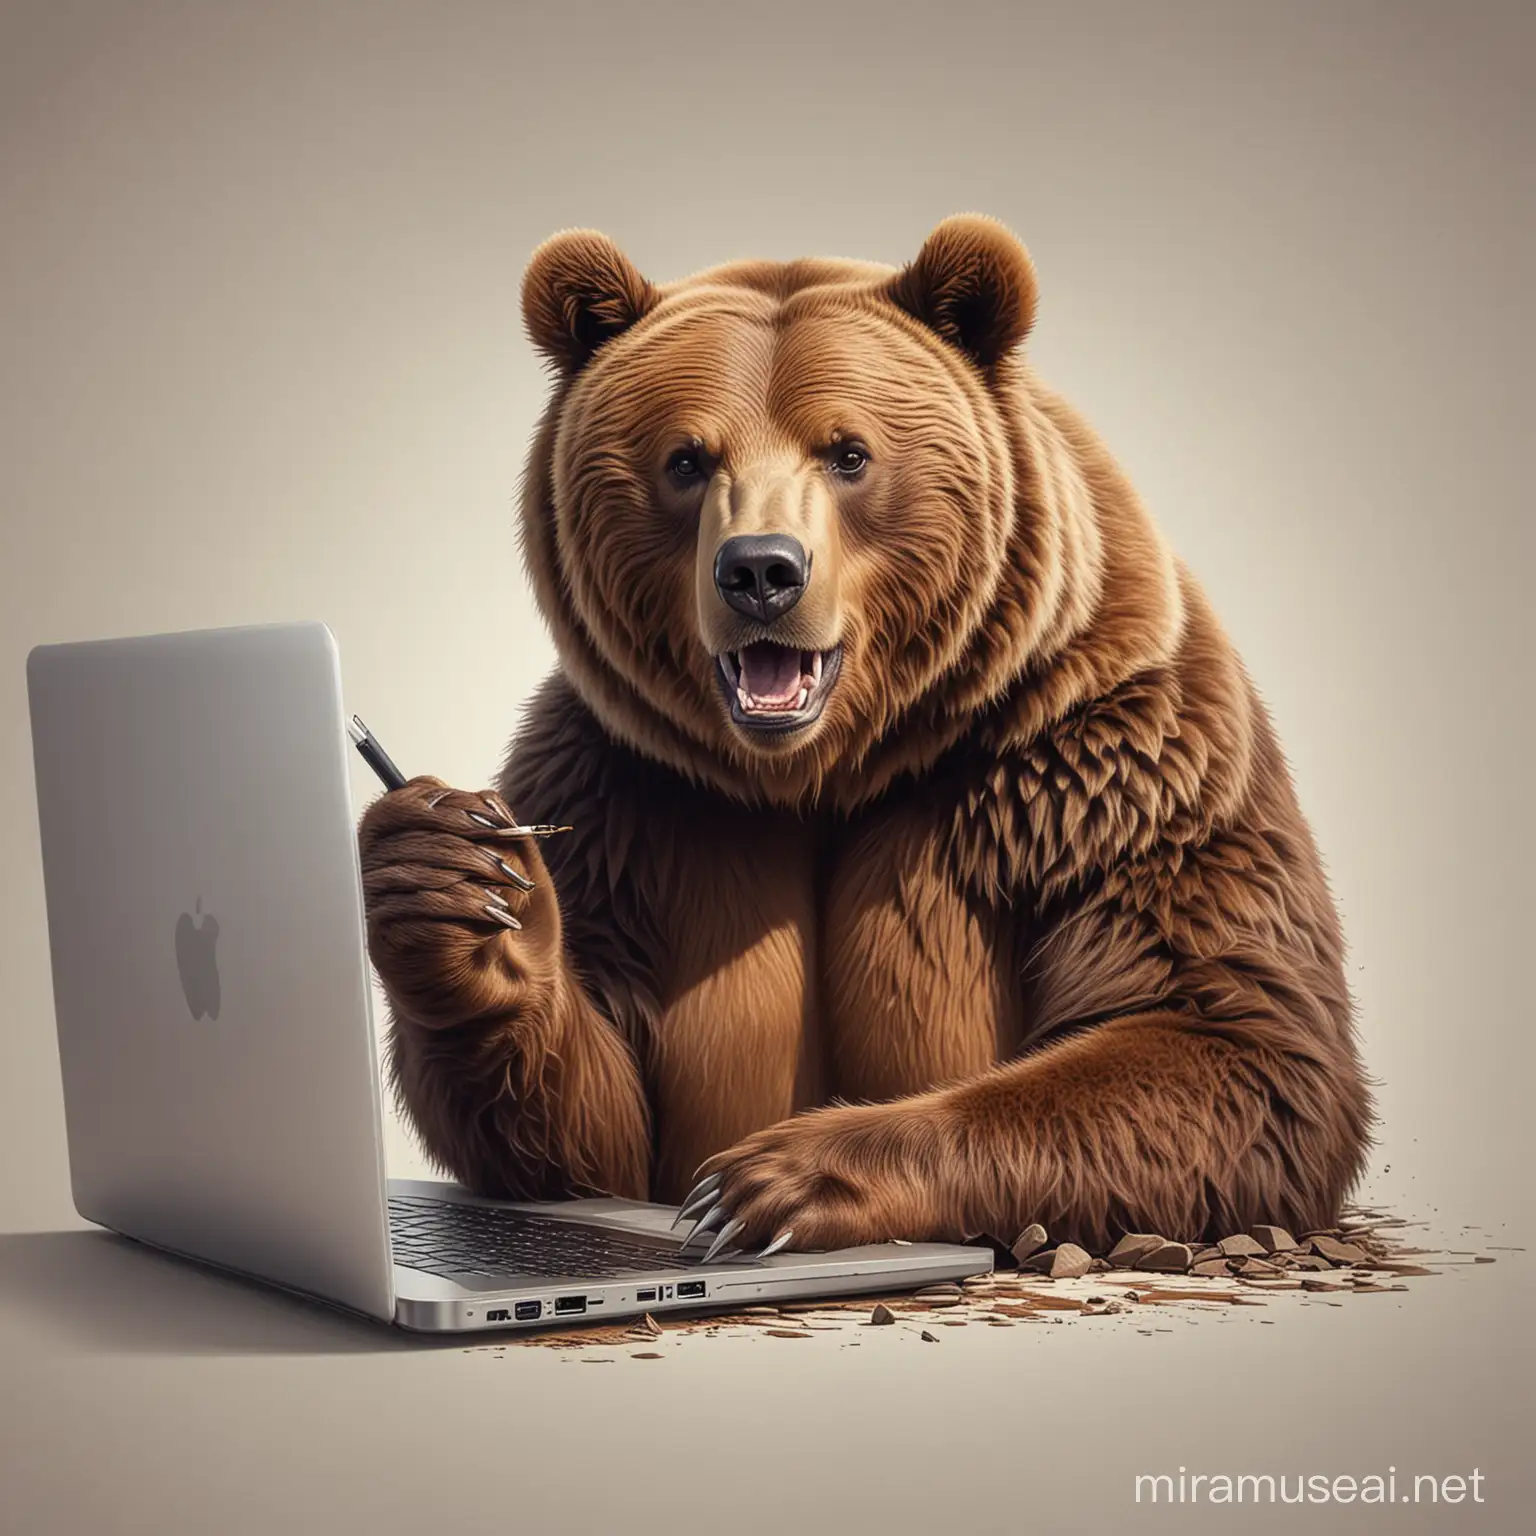 a picture of ferocious brown bear sitting at a laptop,  you need to finish drawing the laptop lid so that it is completely visible